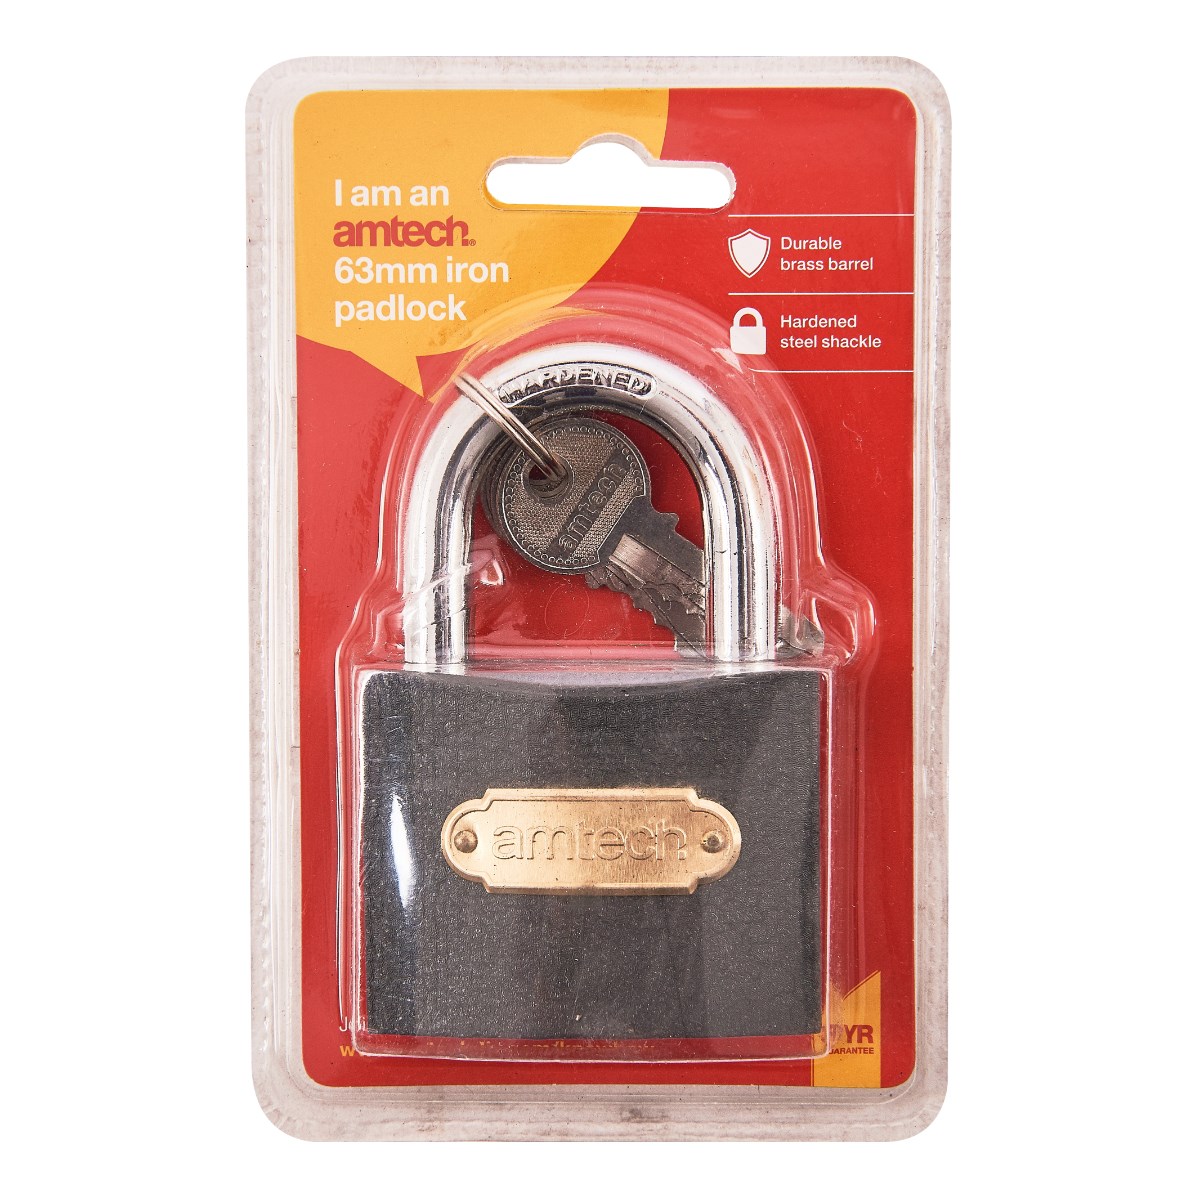 HEAVY DUTY CAST IRON PADLOCK 50MM OUTDOOR SAFETY SECURITY SHACKLE LOCK 